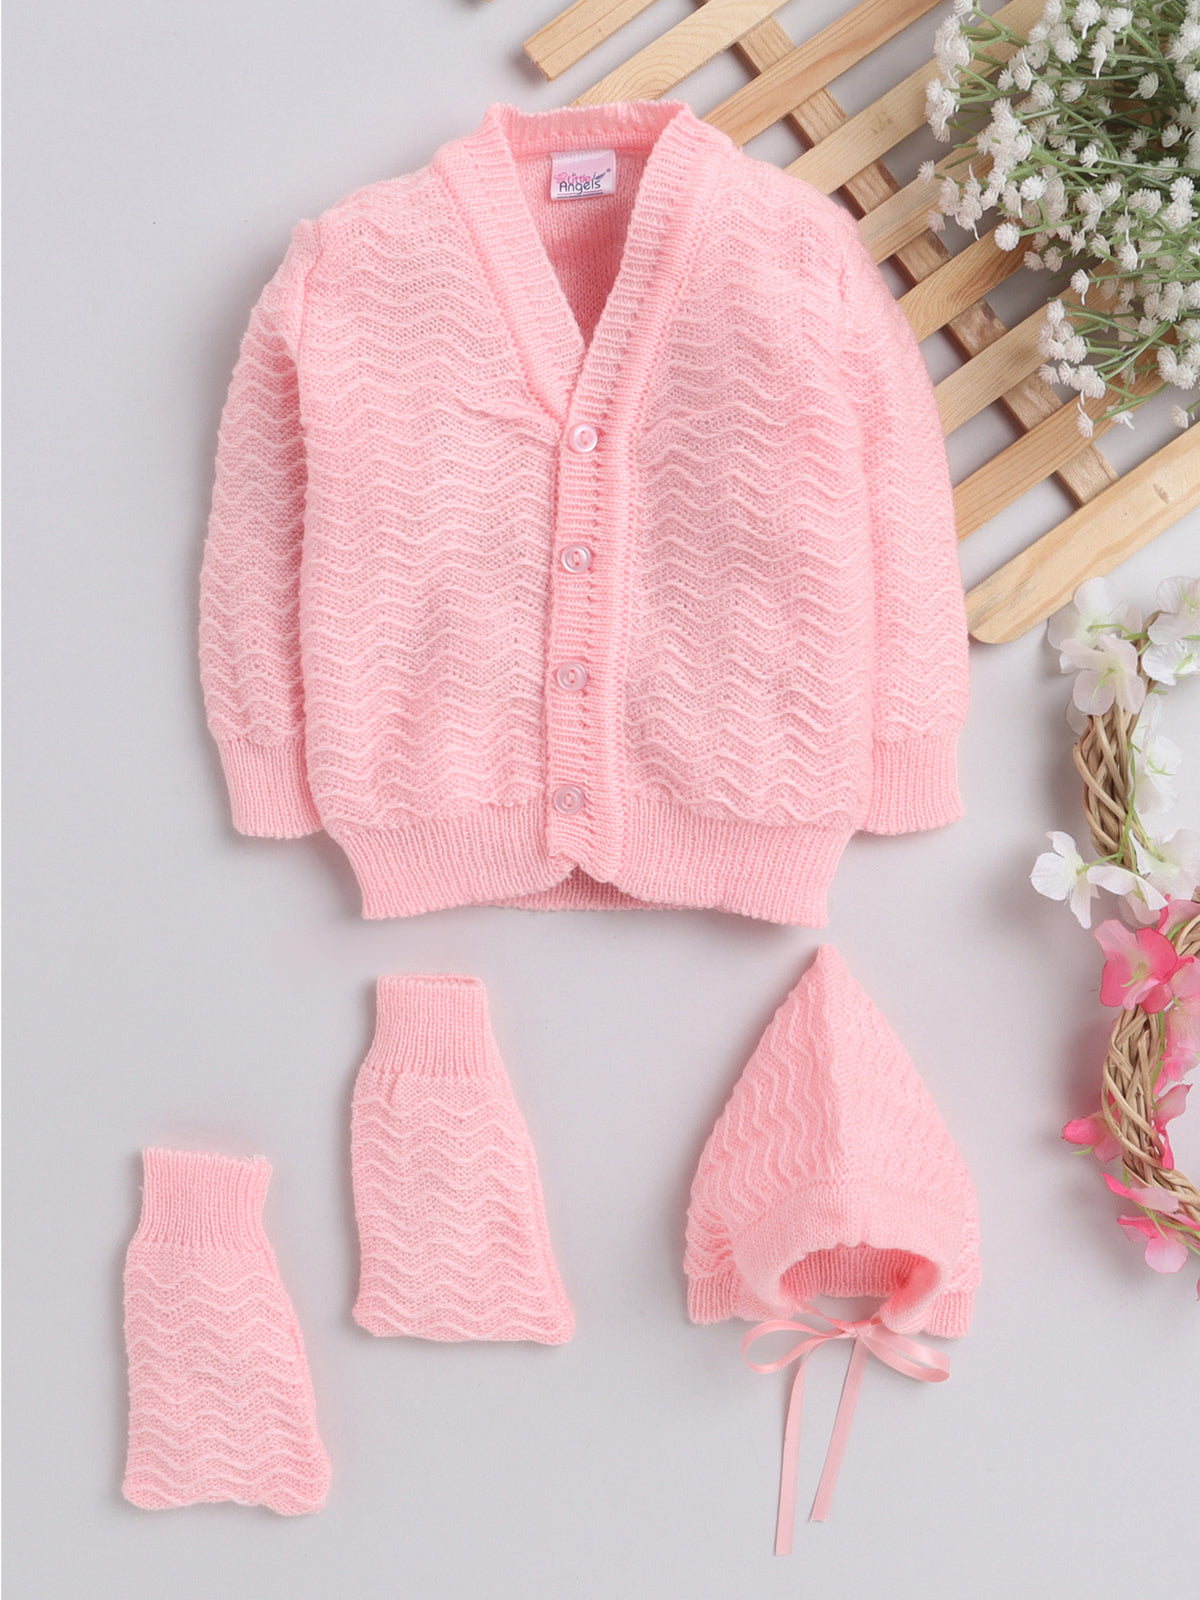 Full Sleeve Front open  pink color zig-zag pattern sweater with caps and socks